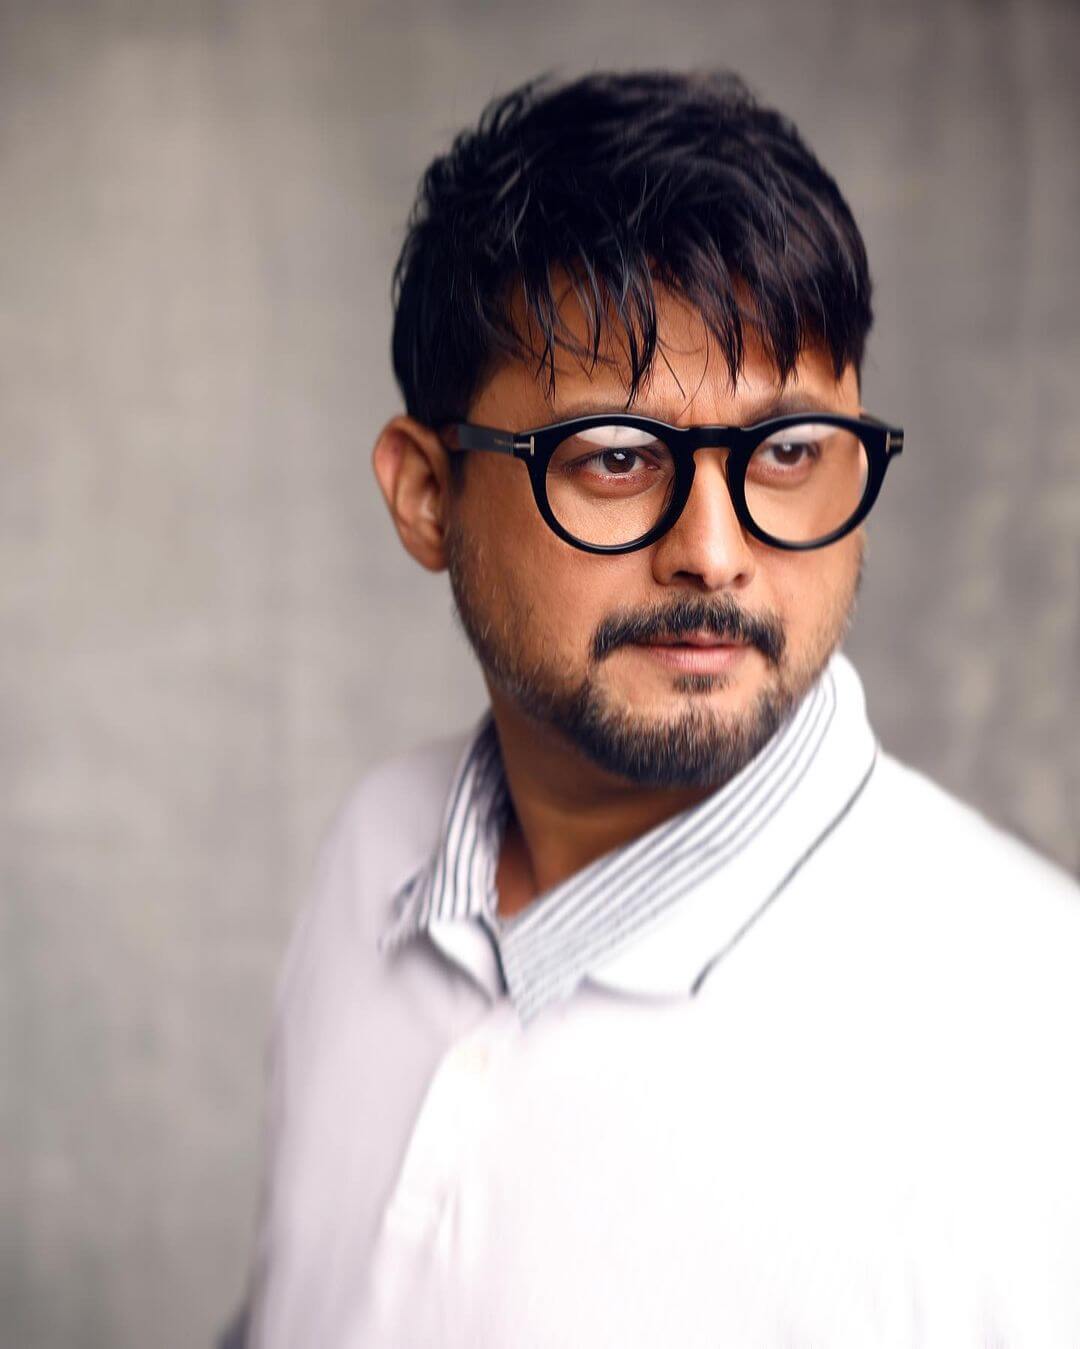 Swapnil Joshi close up shot in white outfit